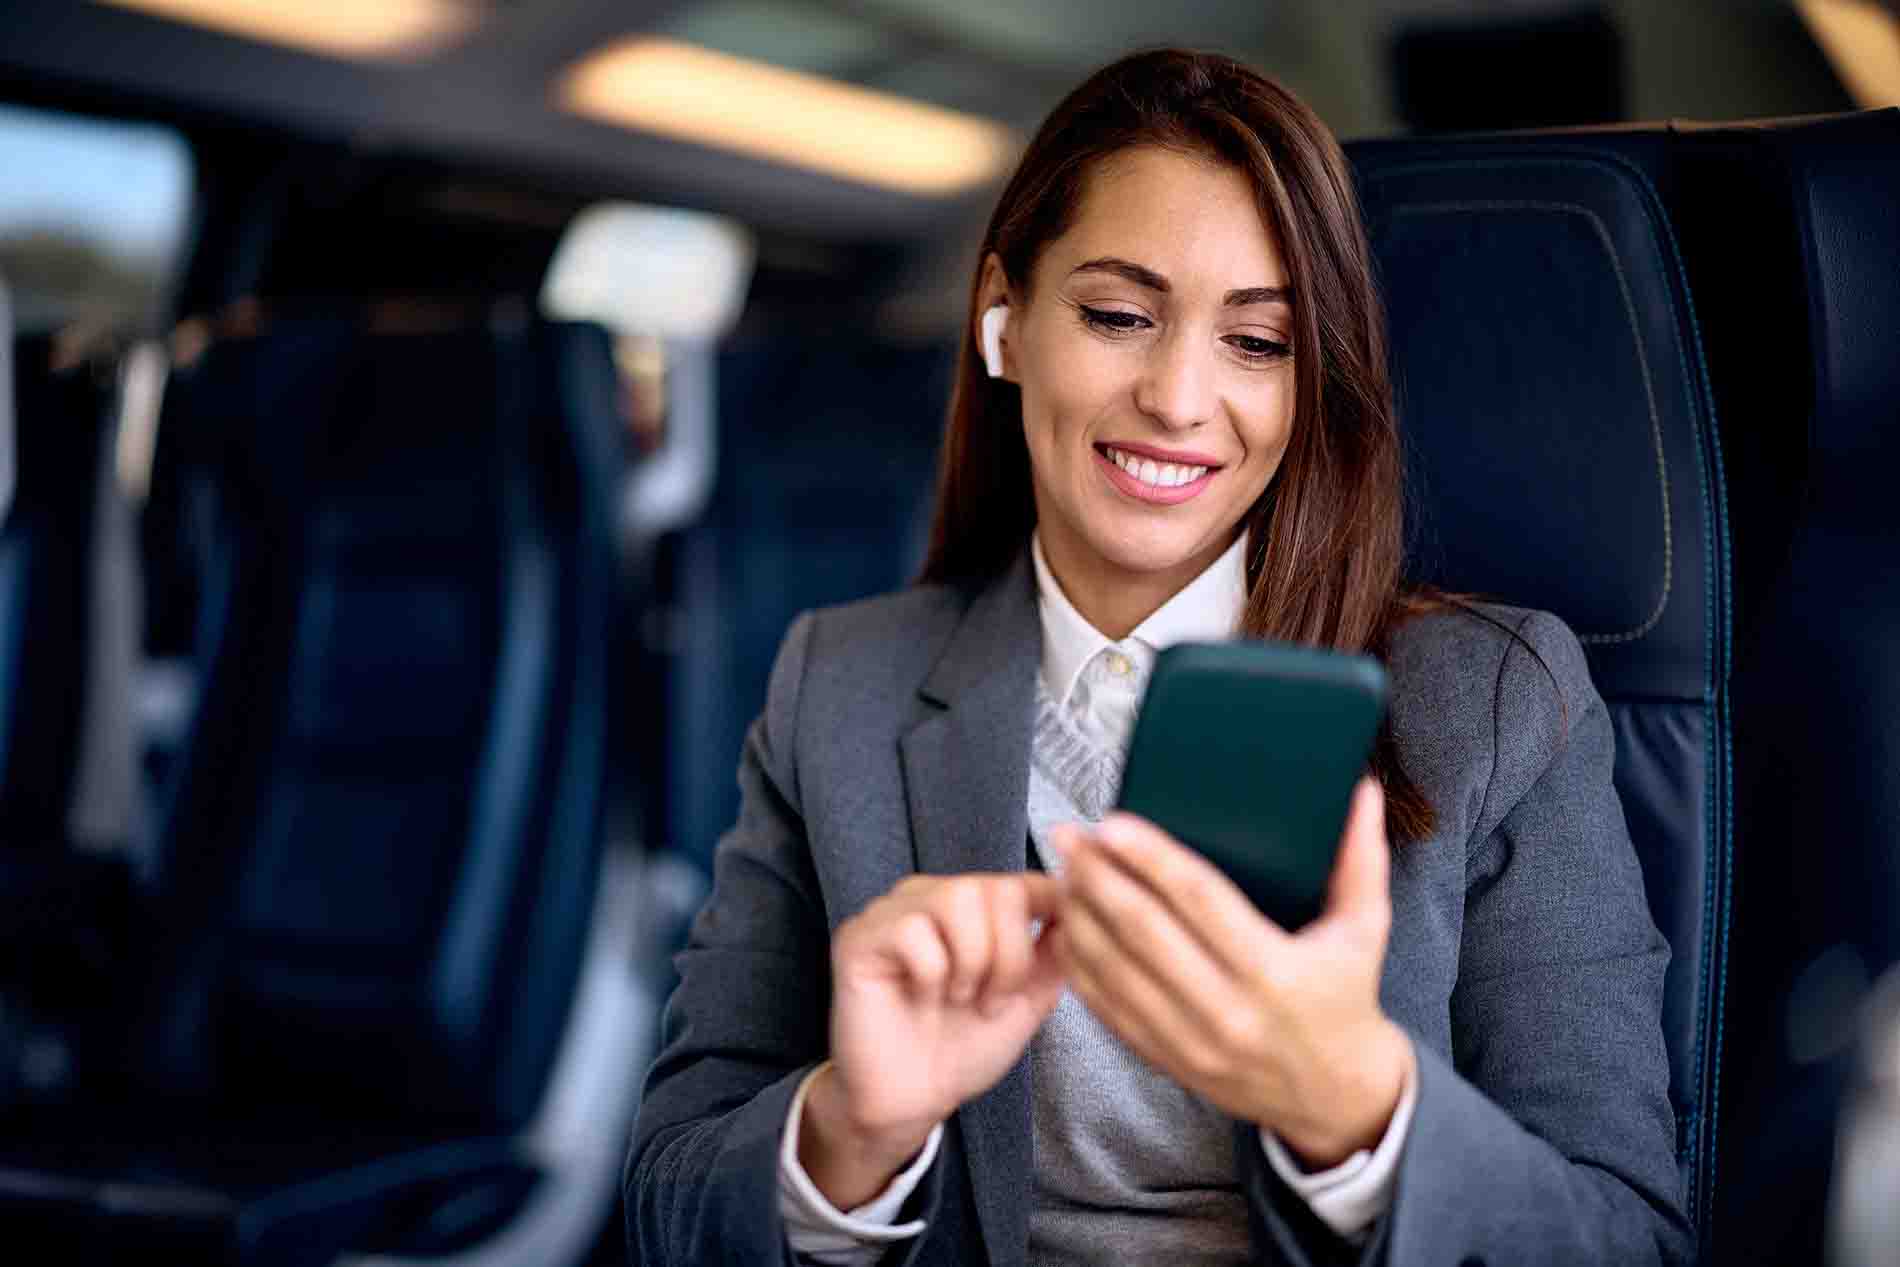 Young happy woman using smart phone while riding in a train. Copy space.